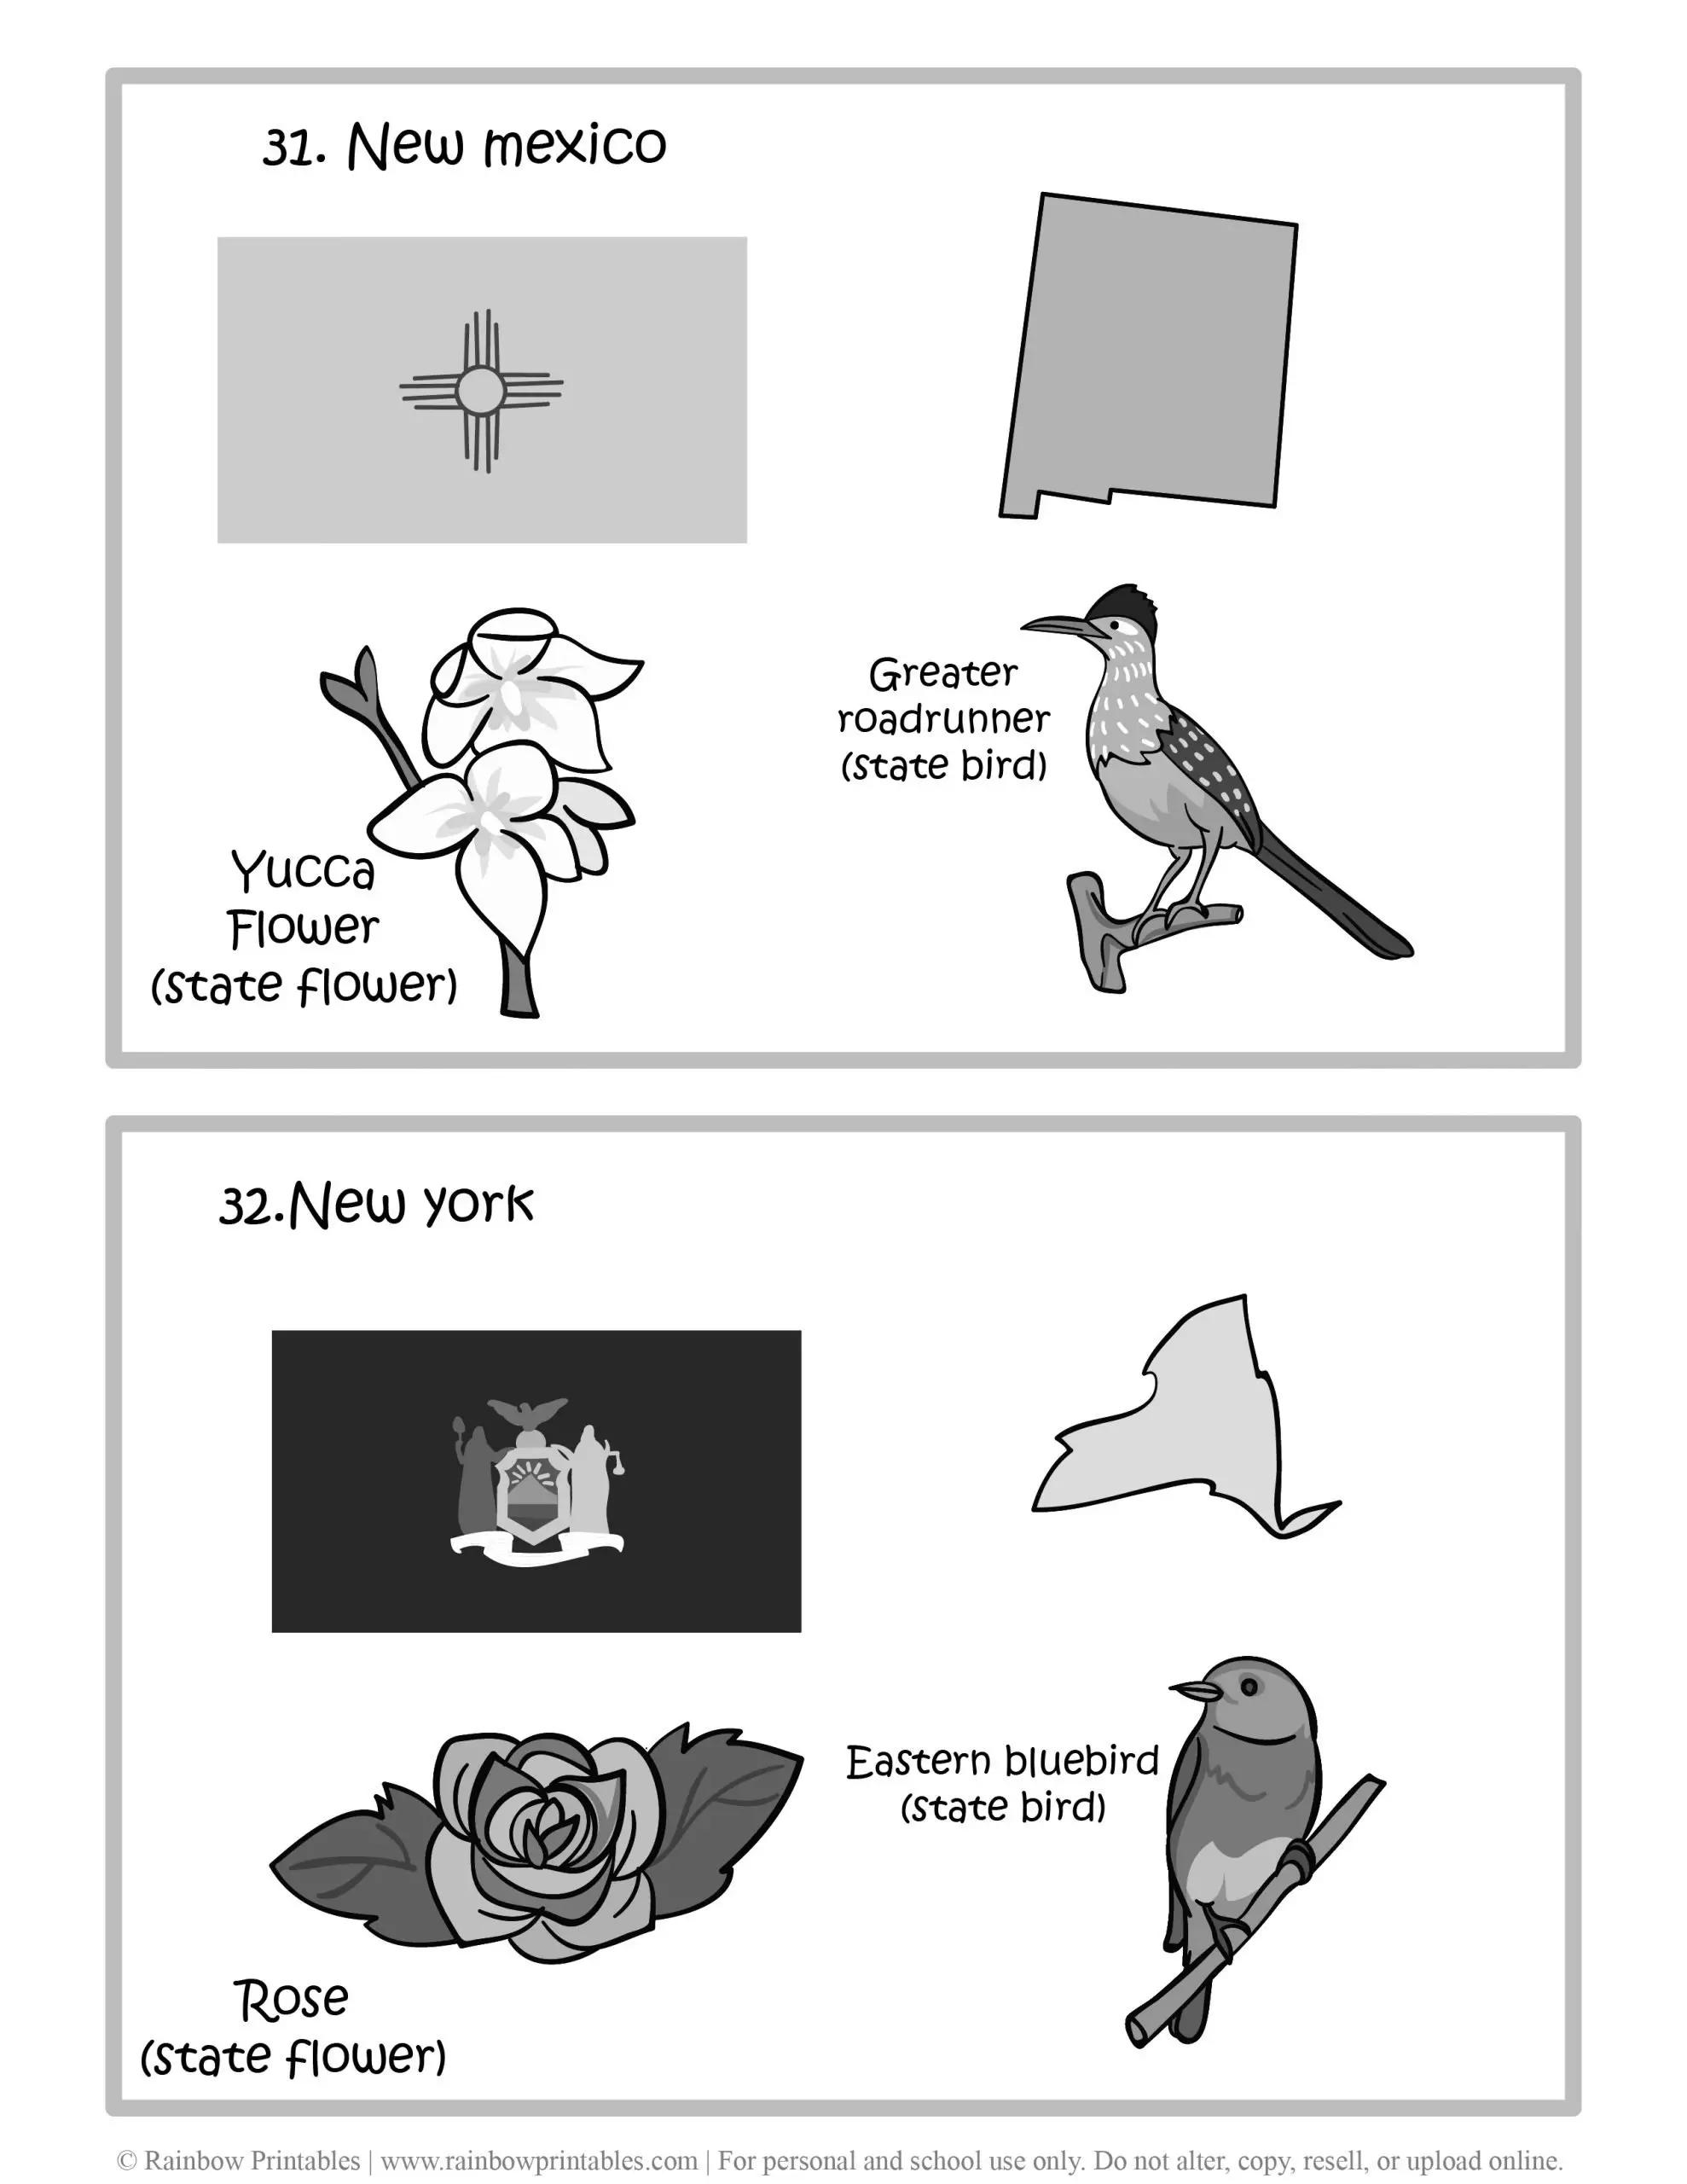 New Mexico, New York, 50 US State Flag, State Bird, State Flower, United States of America - American States Geography Worksheet Class Lesson Printables Flashcards Black White